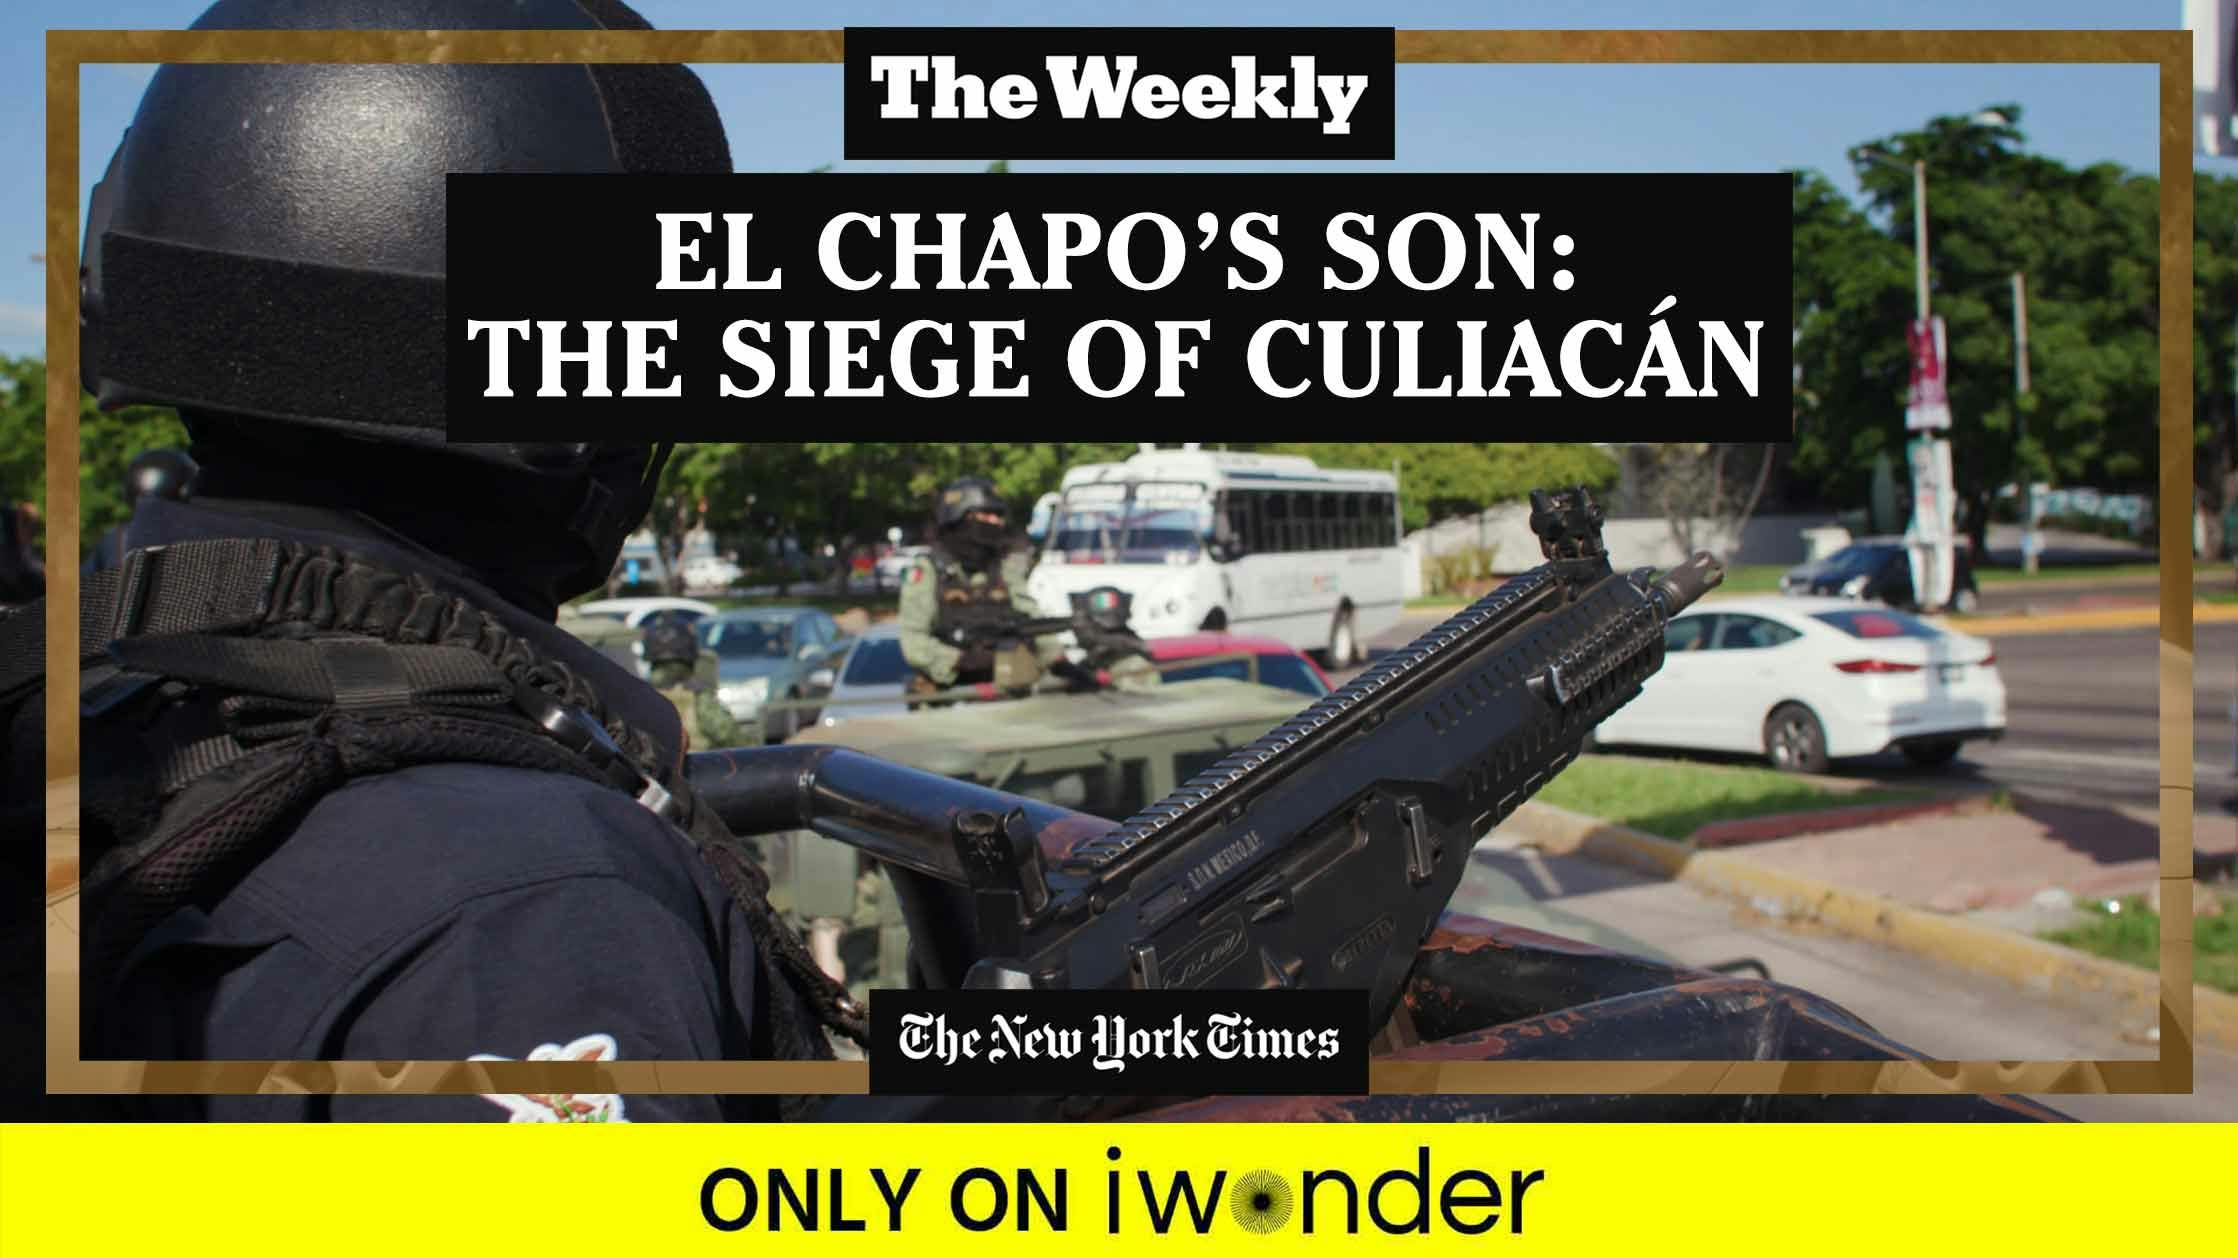 The Weekly: El Chapo’s Son - The Siege Of Culiacán